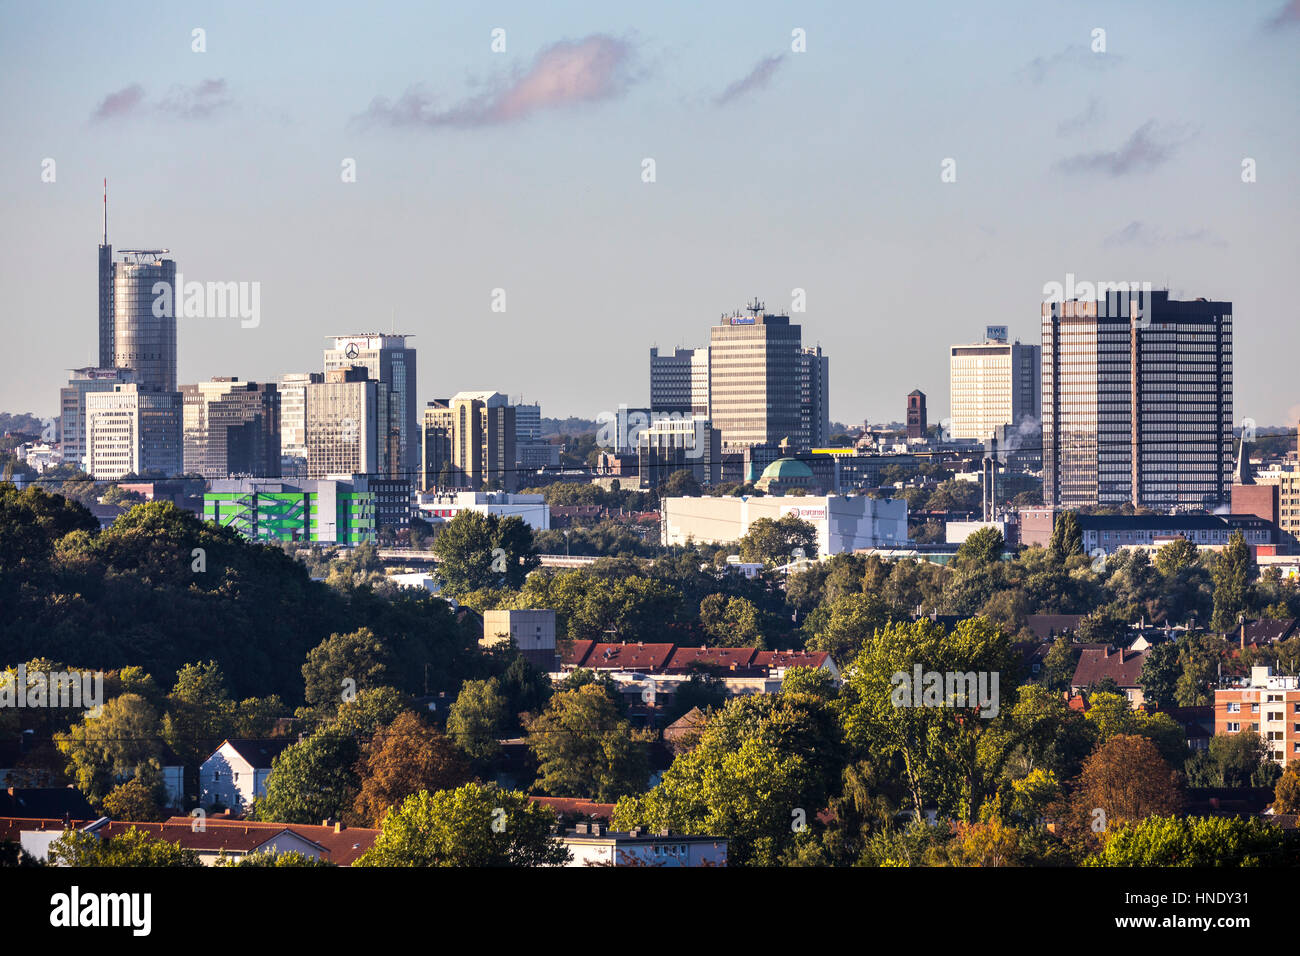 Panorama of the city center of Essen, Germany, Skyline, left the RWE tower, right the town hall, Stock Photo